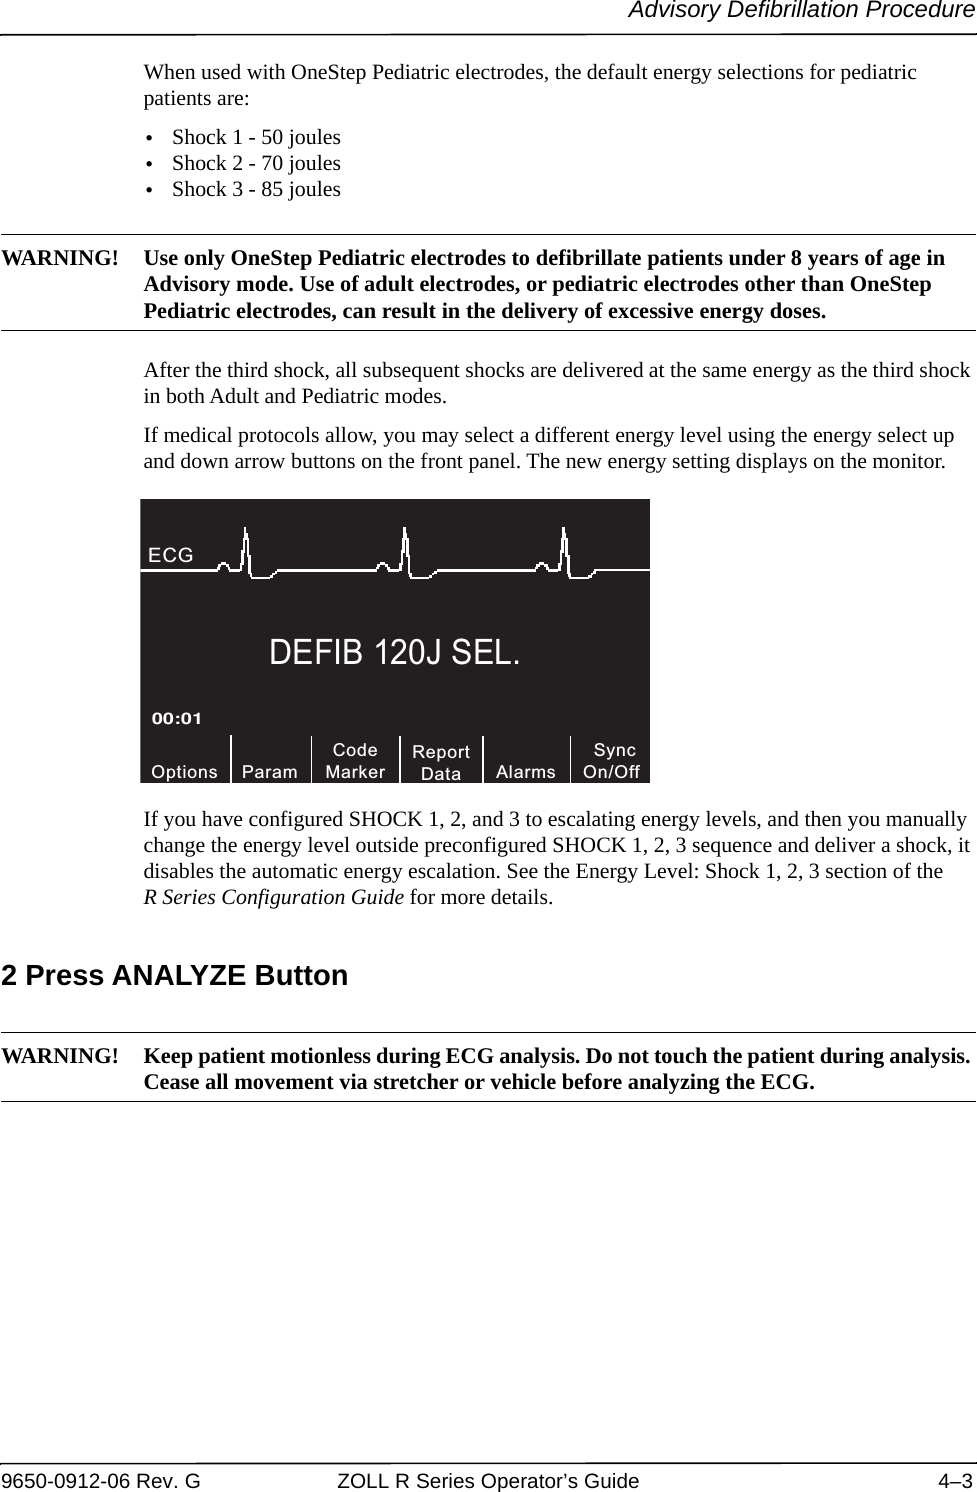 Advisory Defibrillation Procedure9650-0912-06 Rev. G ZOLL R Series Operator’s Guide 4–3When used with OneStep Pediatric electrodes, the default energy selections for pediatric patients are: •Shock 1 - 50 joules•Shock 2 - 70 joules•Shock 3 - 85 joules WARNING! Use only OneStep Pediatric electrodes to defibrillate patients under 8 years of age in Advisory mode. Use of adult electrodes, or pediatric electrodes other than OneStep Pediatric electrodes, can result in the delivery of excessive energy doses.After the third shock, all subsequent shocks are delivered at the same energy as the third shock in both Adult and Pediatric modes.If medical protocols allow, you may select a different energy level using the energy select up and down arrow buttons on the front panel. The new energy setting displays on the monitor.If you have configured SHOCK 1, 2, and 3 to escalating energy levels, and then you manually change the energy level outside preconfigured SHOCK 1, 2, 3 sequence and deliver a shock, it disables the automatic energy escalation. See the Energy Level: Shock 1, 2, 3 section of the R Series Configuration Guide for more details. 2 Press ANALYZE ButtonWARNING! Keep patient motionless during ECG analysis. Do not touch the patient during analysis. Cease all movement via stretcher or vehicle before analyzing the ECG. DEFIB 120J SEL.CodeMarkerOptions00:01ECG ParamReportData SyncOn/OffAlarms